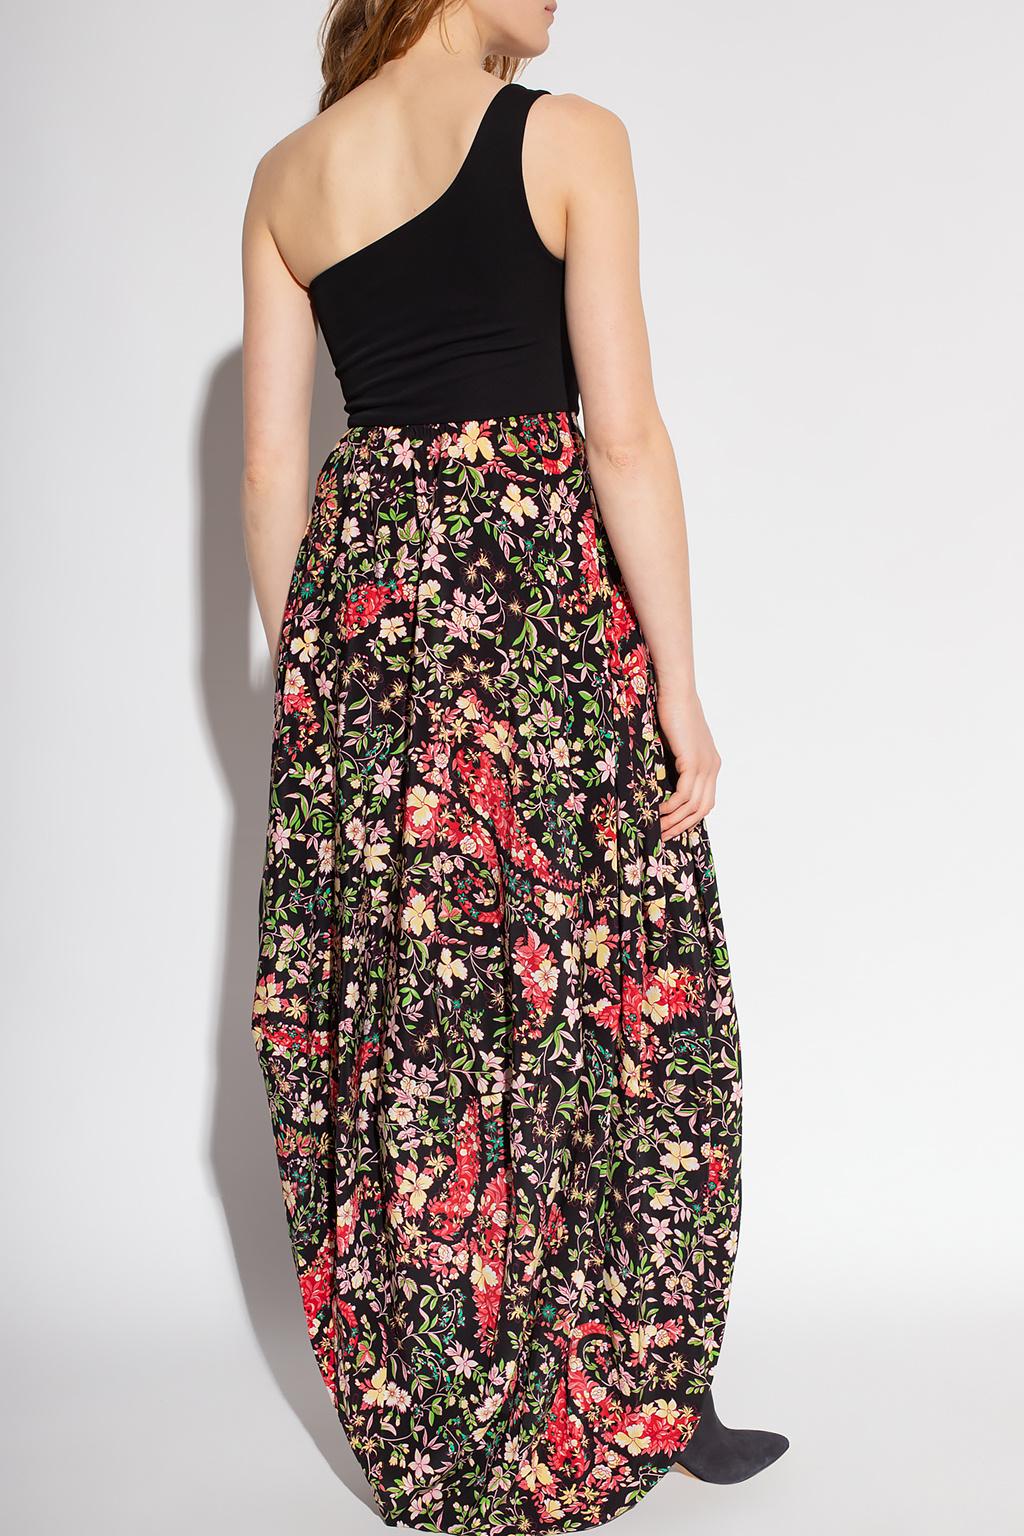 Etro One Shoulder Floral Print Dress Size 42 NWT In New Condition For Sale In Paradise Island, BS